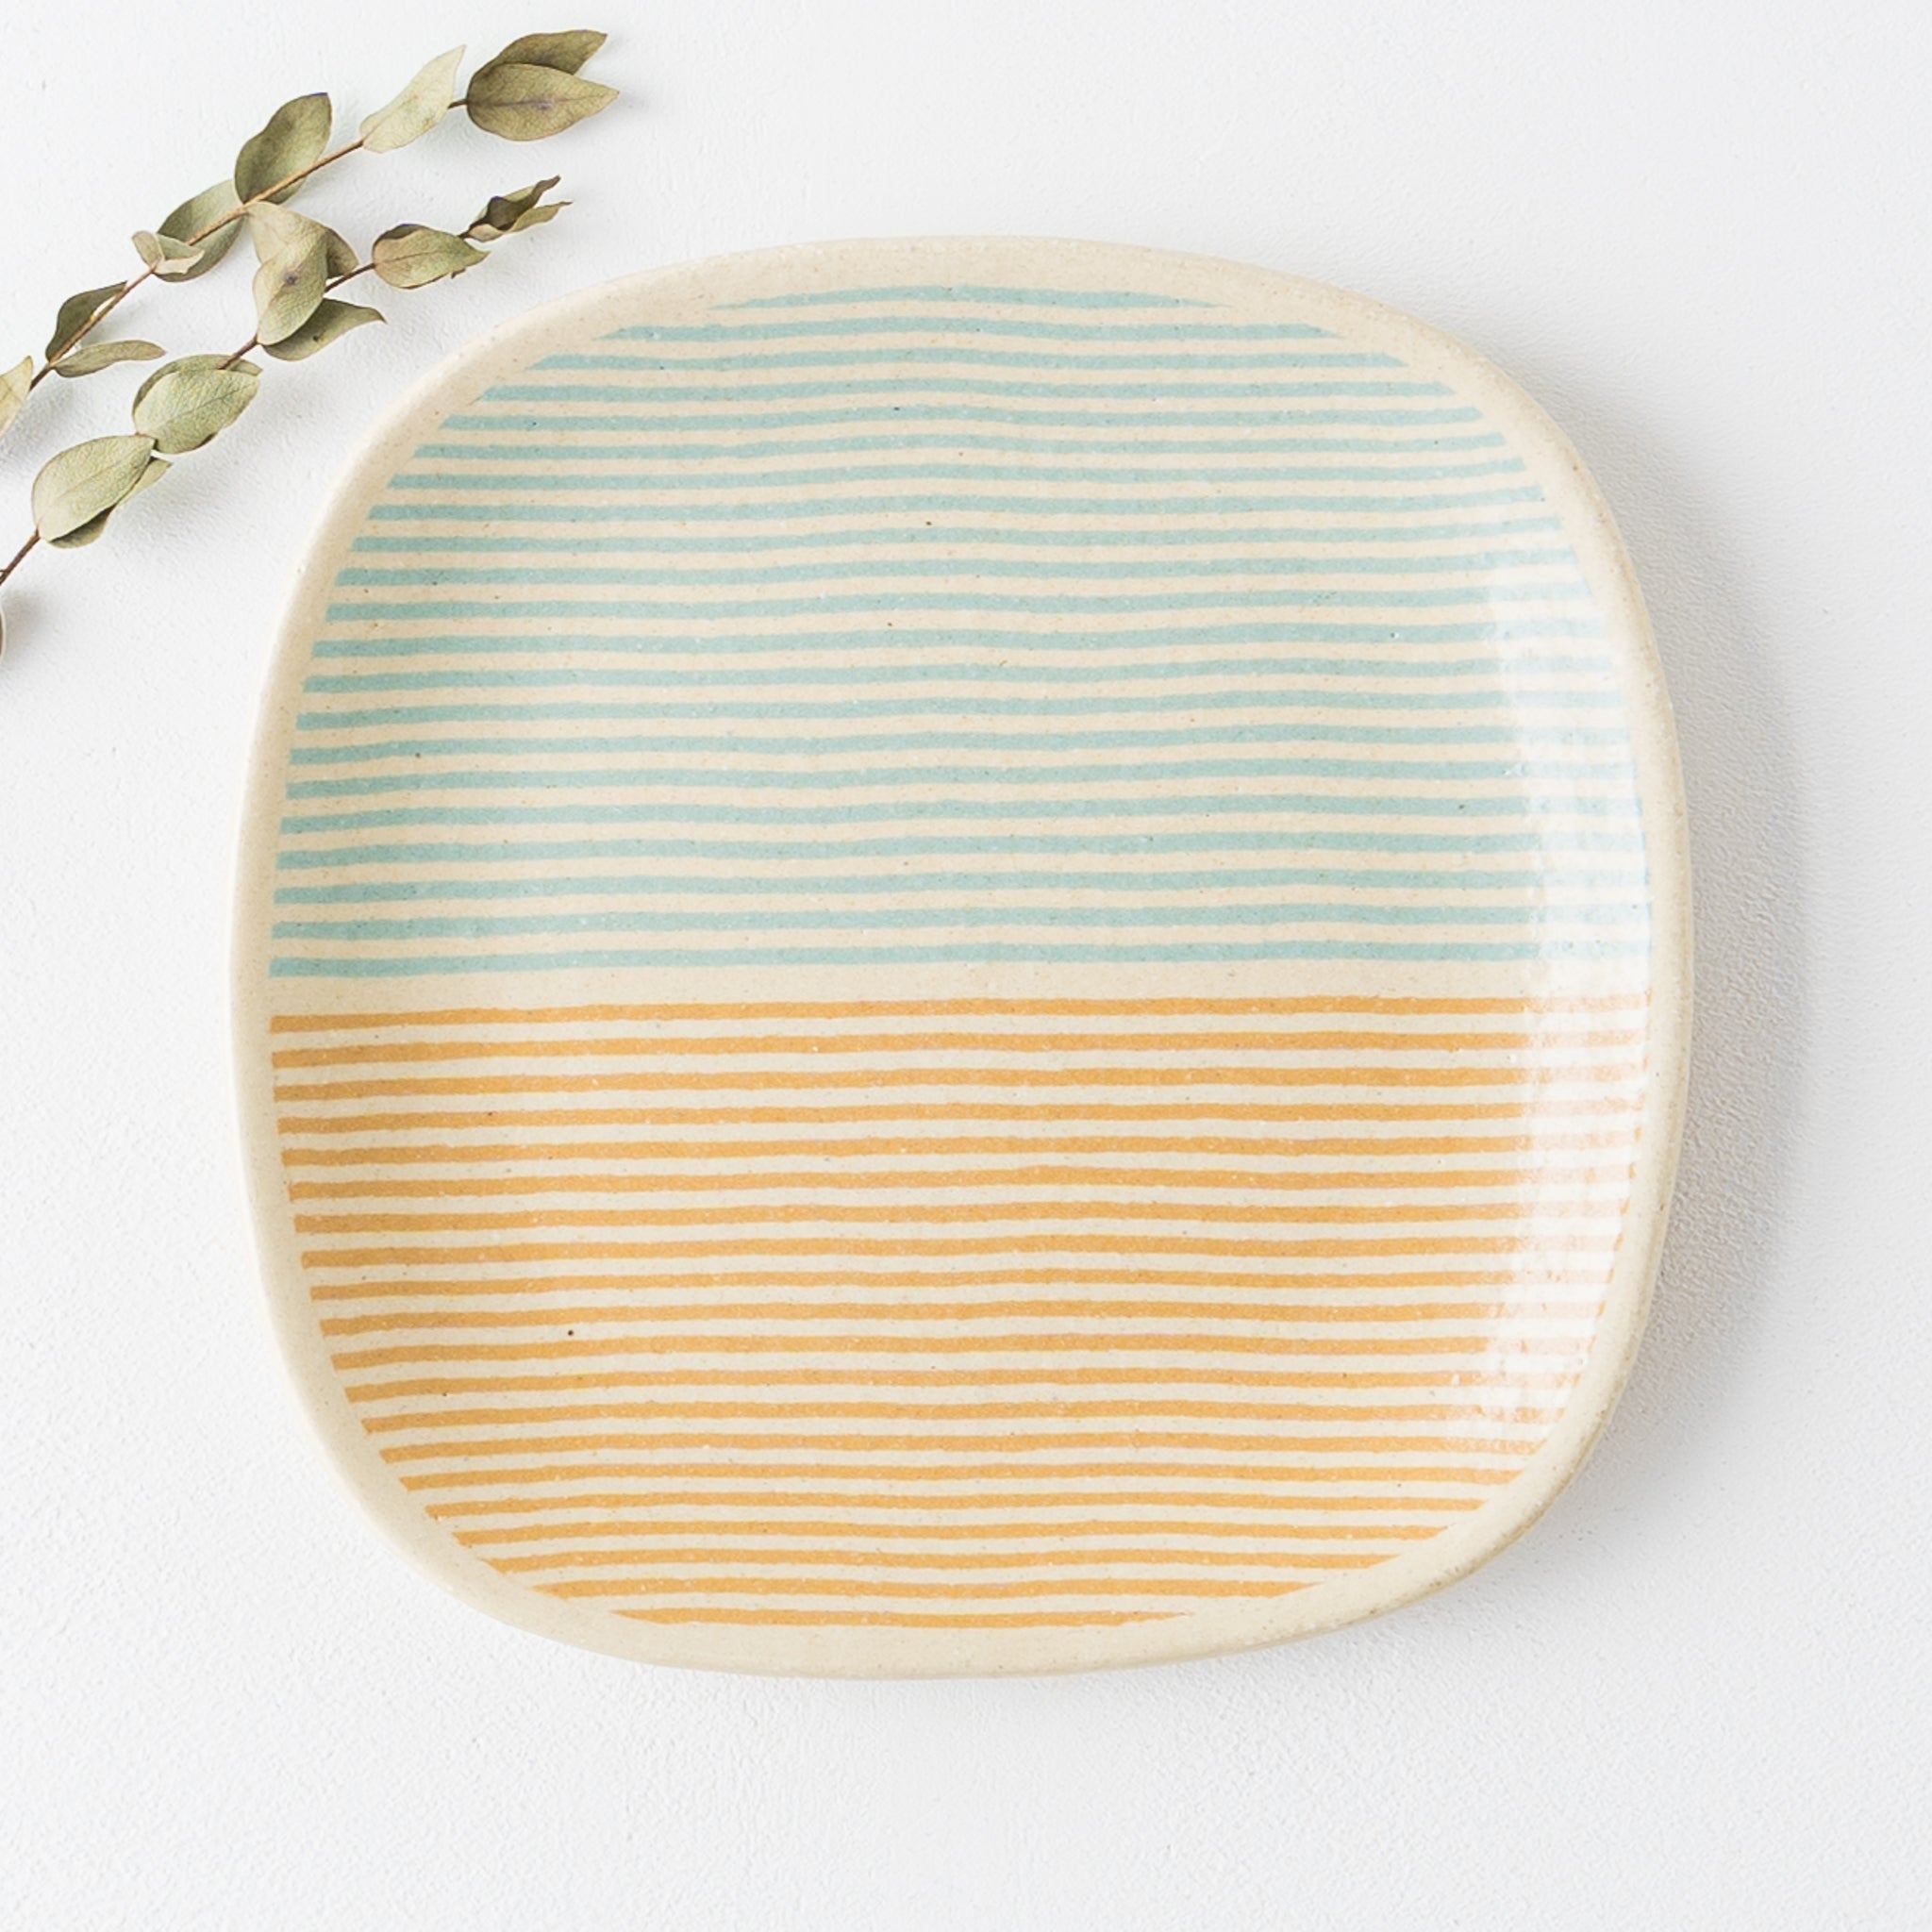 Hanako Sakashita's four-sided plate with cute striped pattern of turquoise and bright yellow